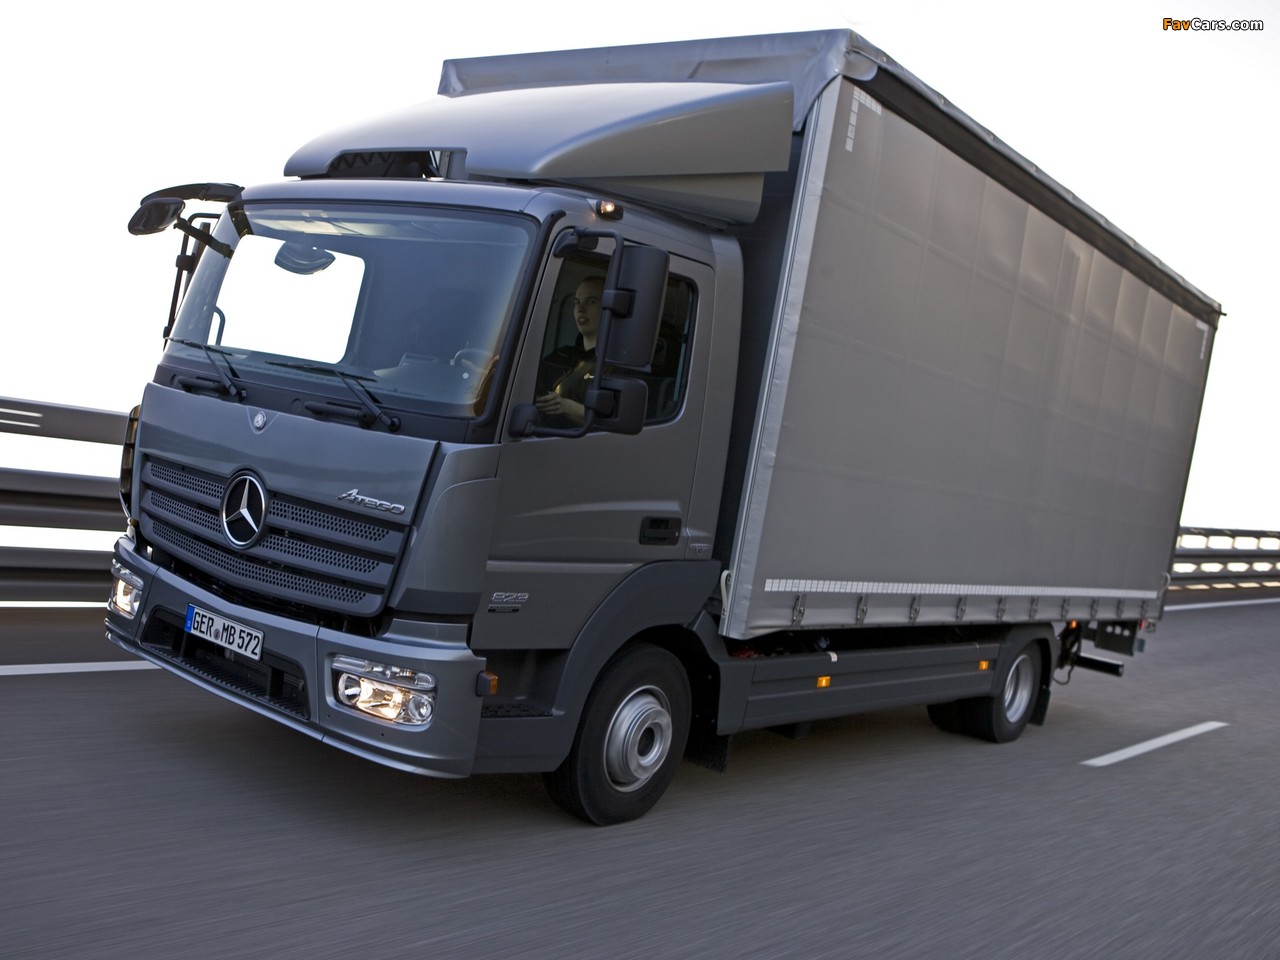 Pictures of Mercedes-Benz Atego 823 2013 (1280x960)